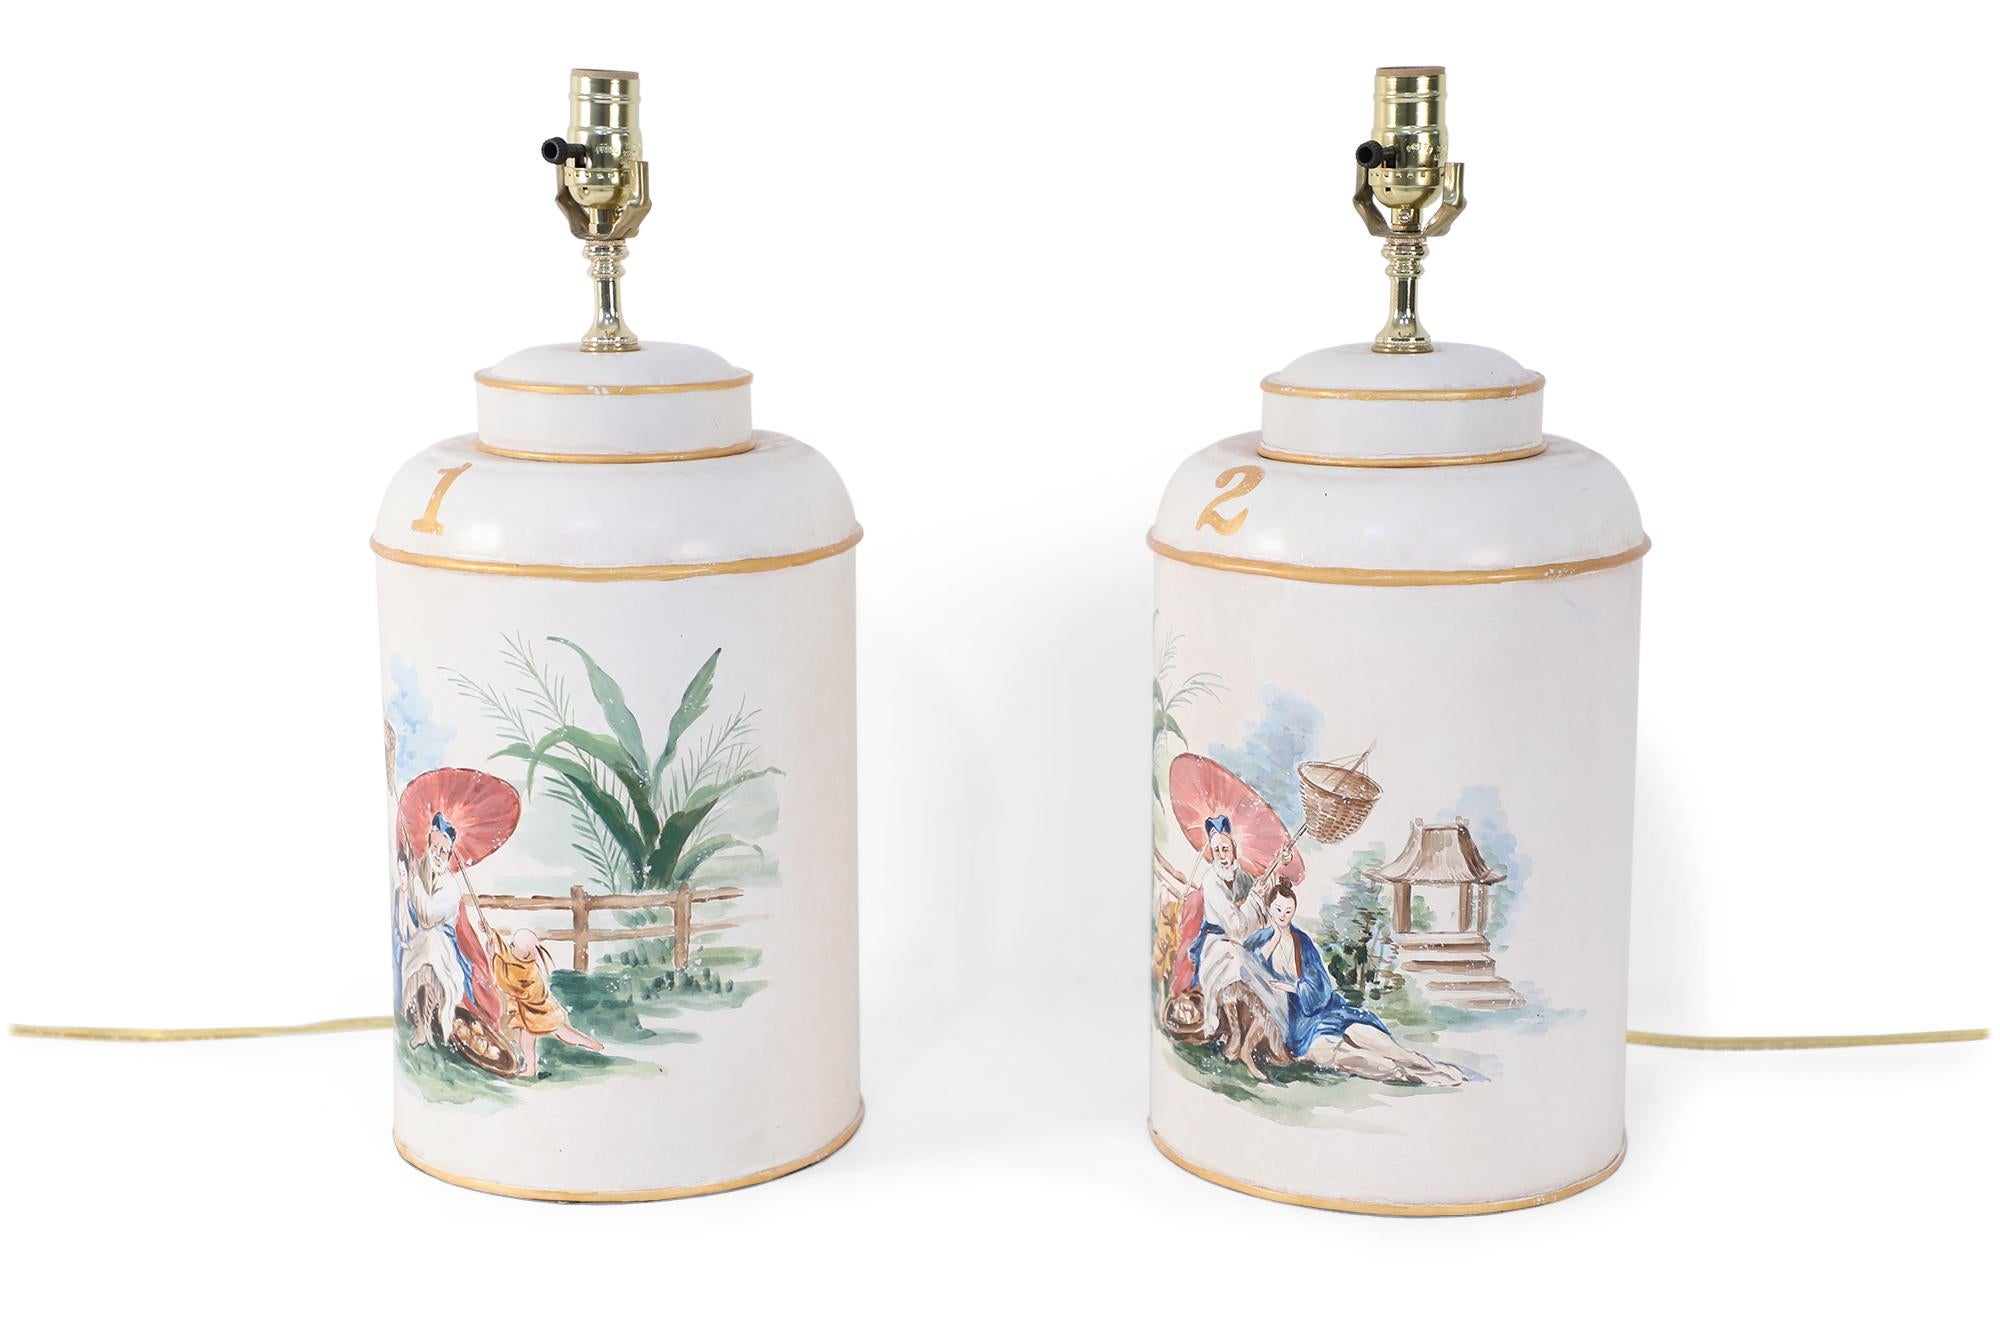 Pair of Chinese vintage tole table lamps with a hand painted outdoor scene of a figure sitting under a parasol in a garden against an off-white background with gold painted numbers.